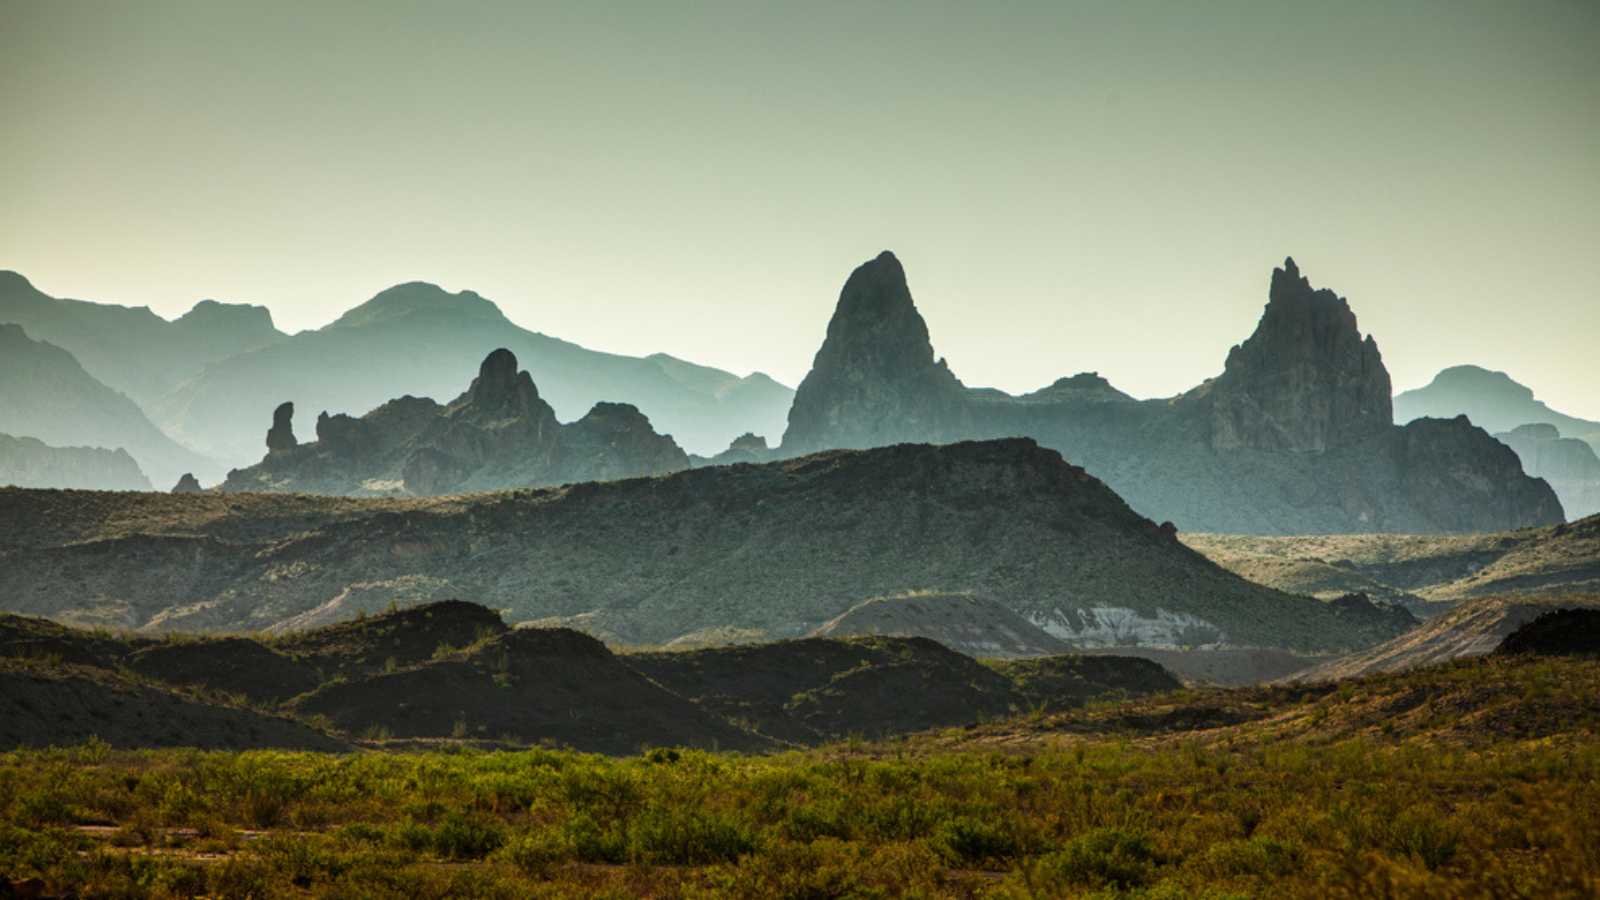 Big Bend National Park, USA. A view of distant mountains in the morning